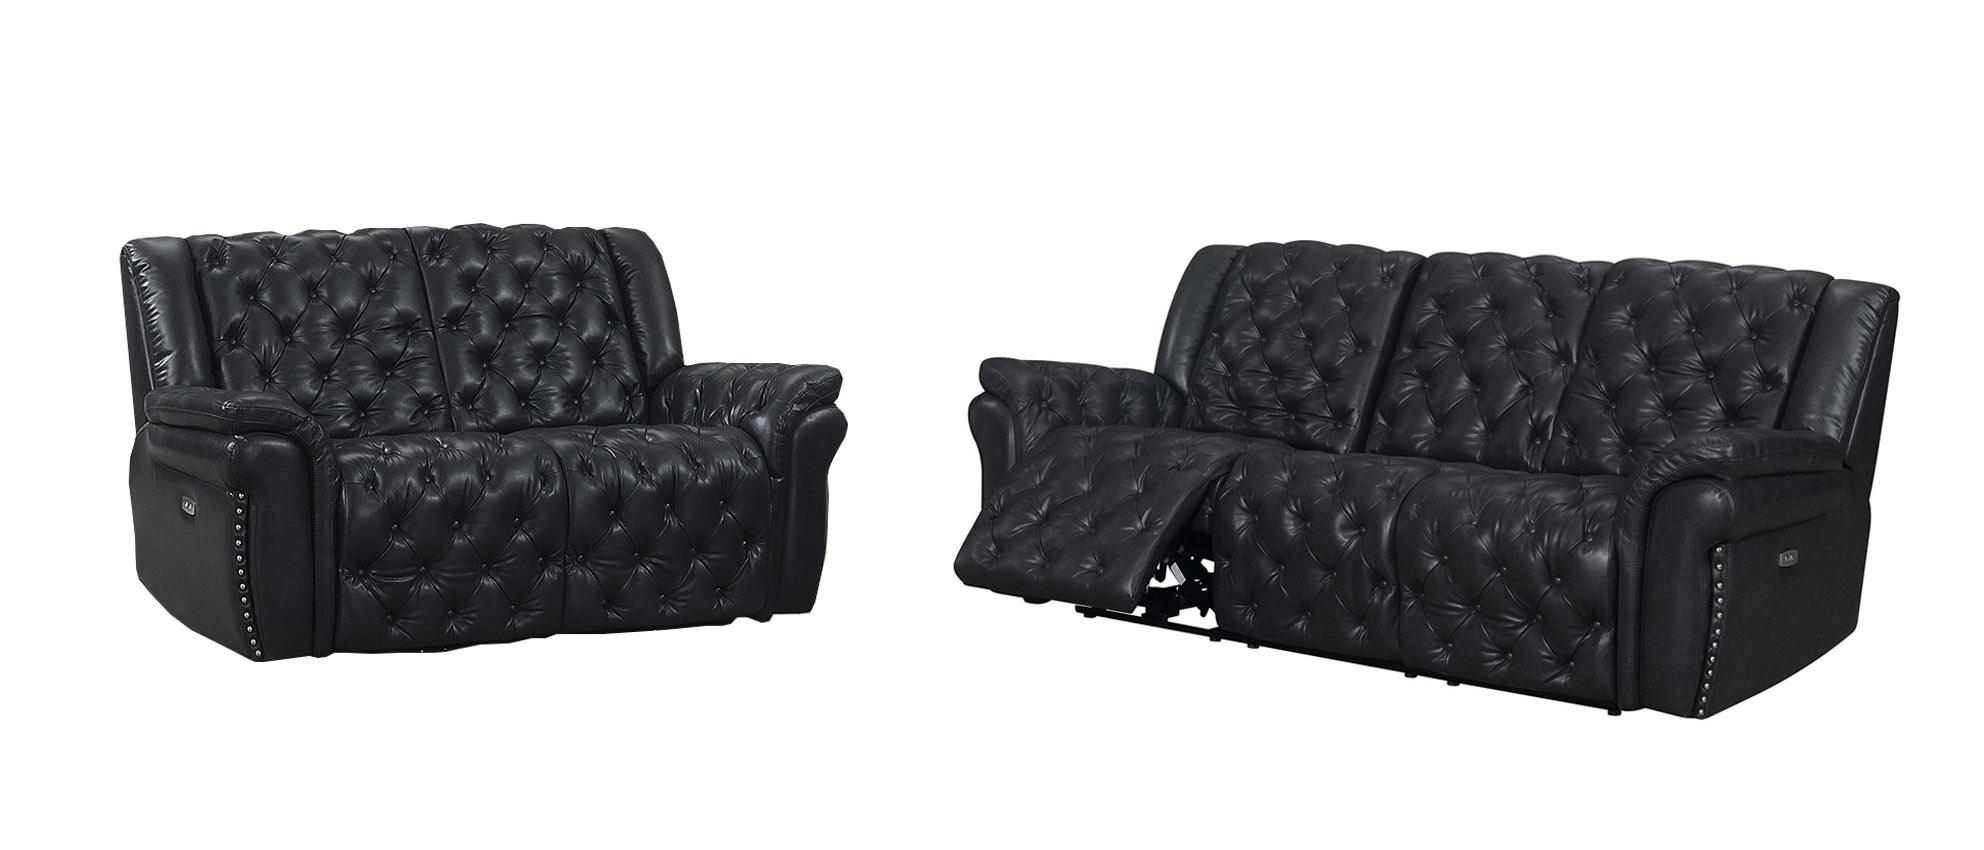 Transitional Power Reclining Set EVELYN BLANCHE CHARCOAL EVELYN-DTP932-7-PRS/PRLS in Charcoal Leather Air/Match